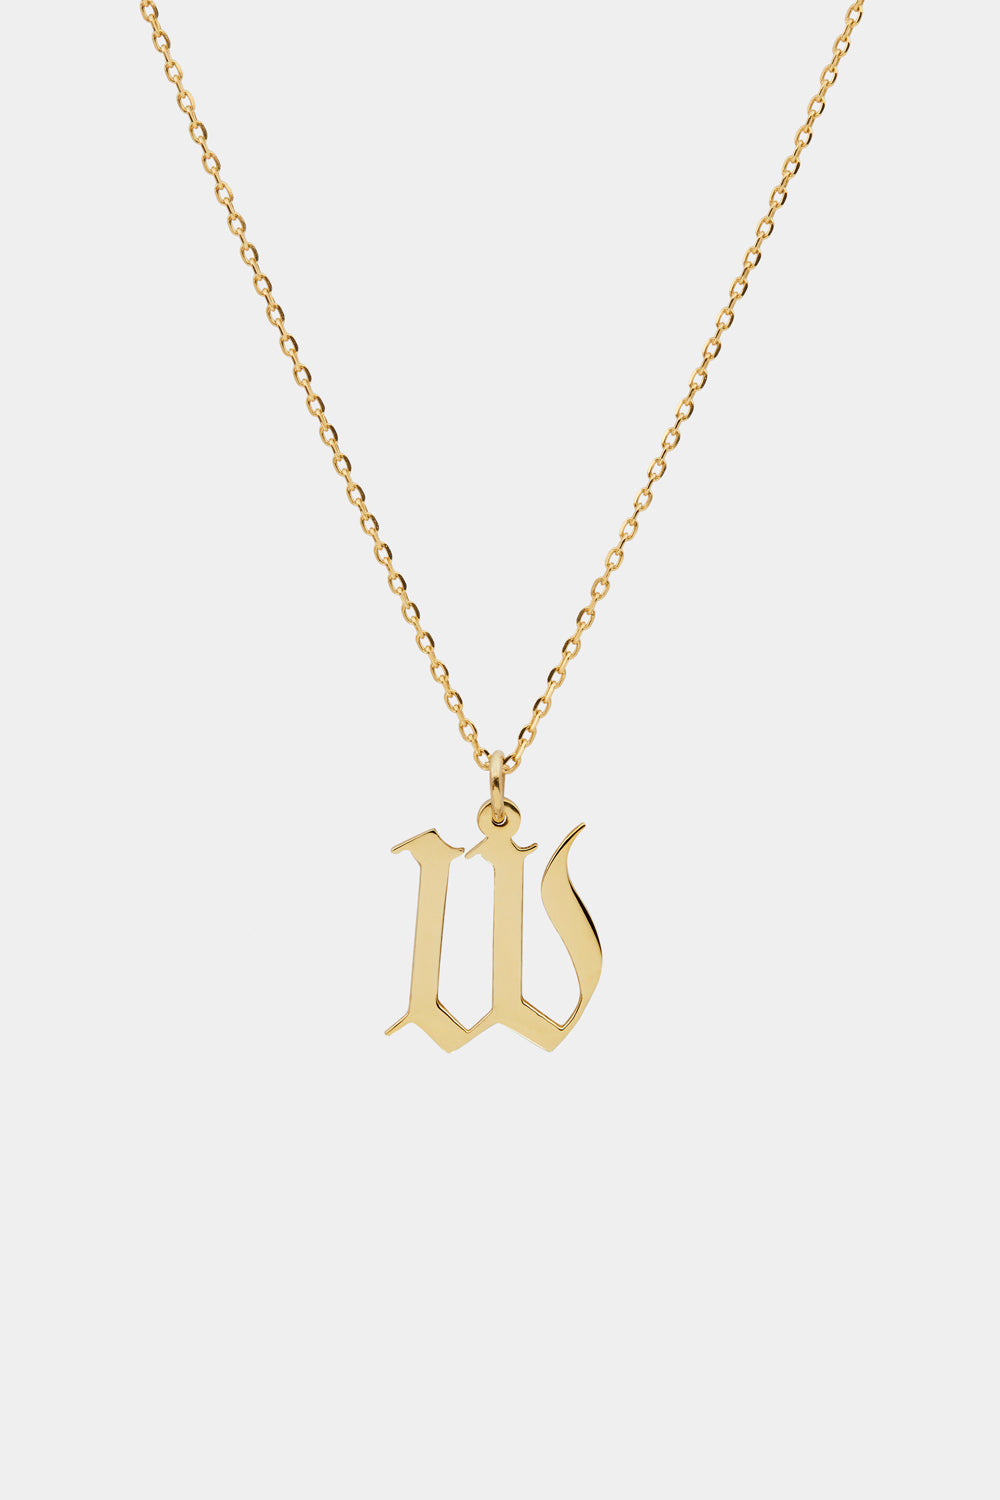 Gothic Letter Necklace | 9K Yellow Gold